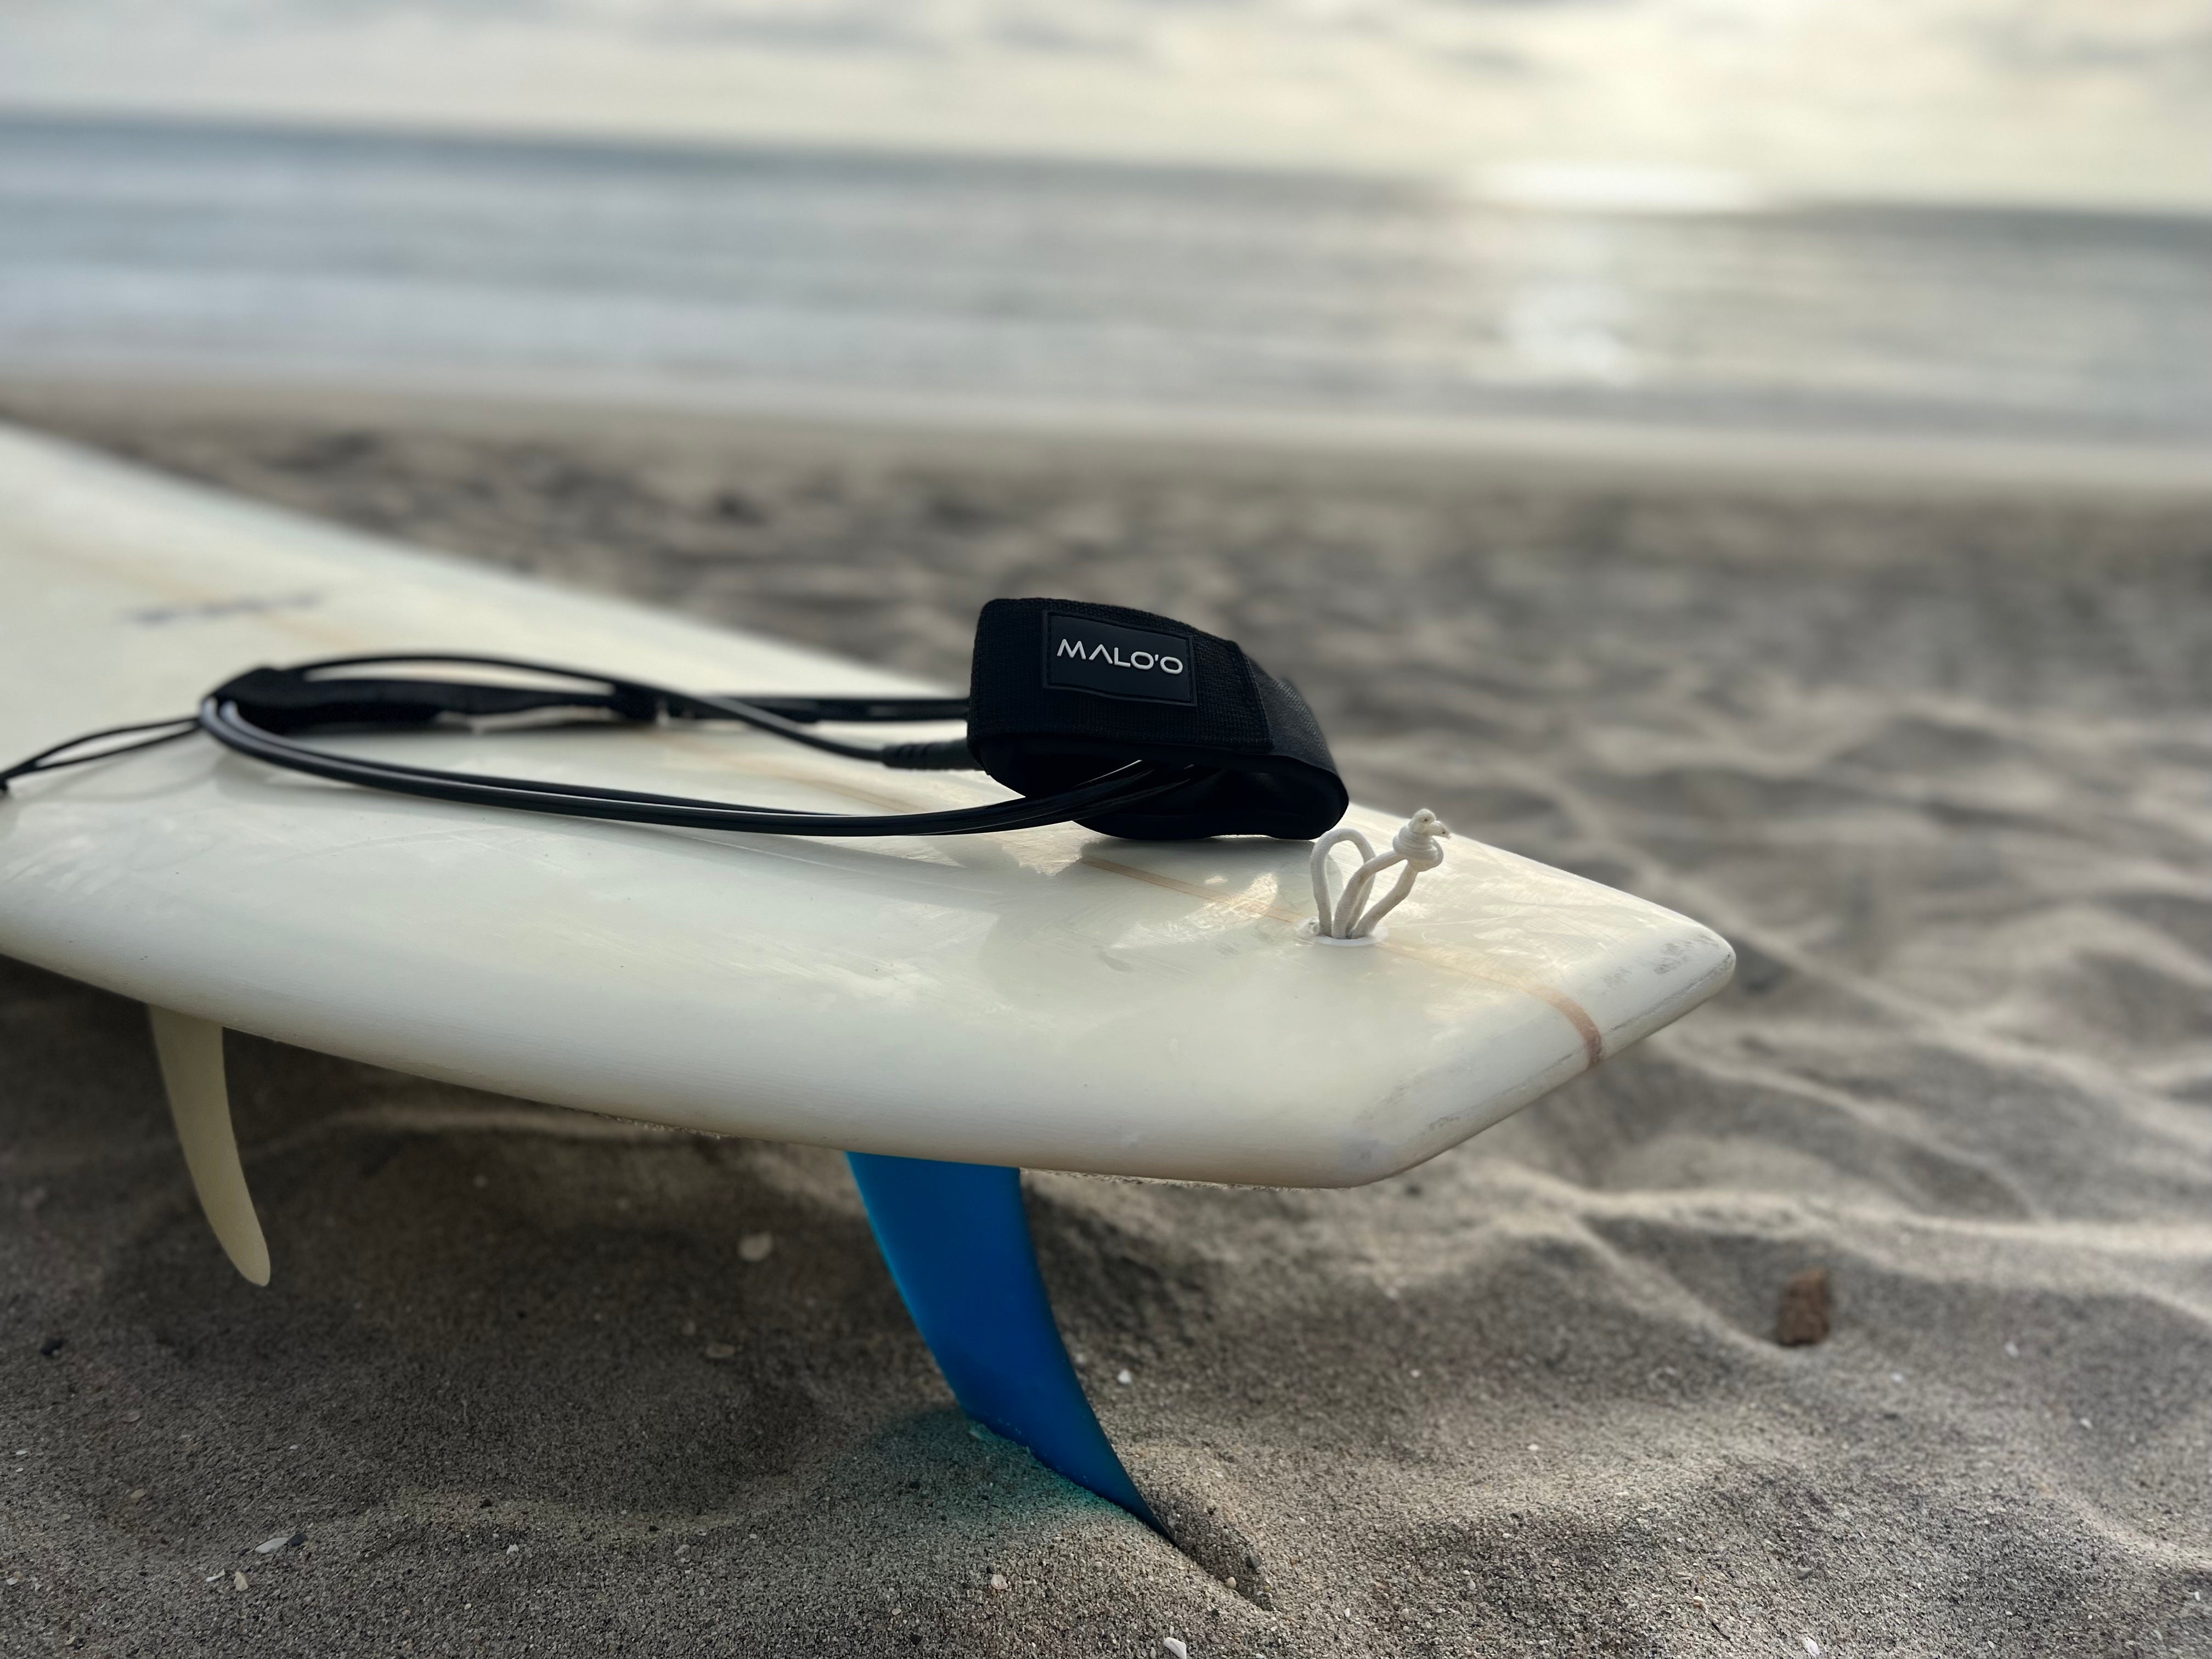 Why Use a Surfboard Leash?